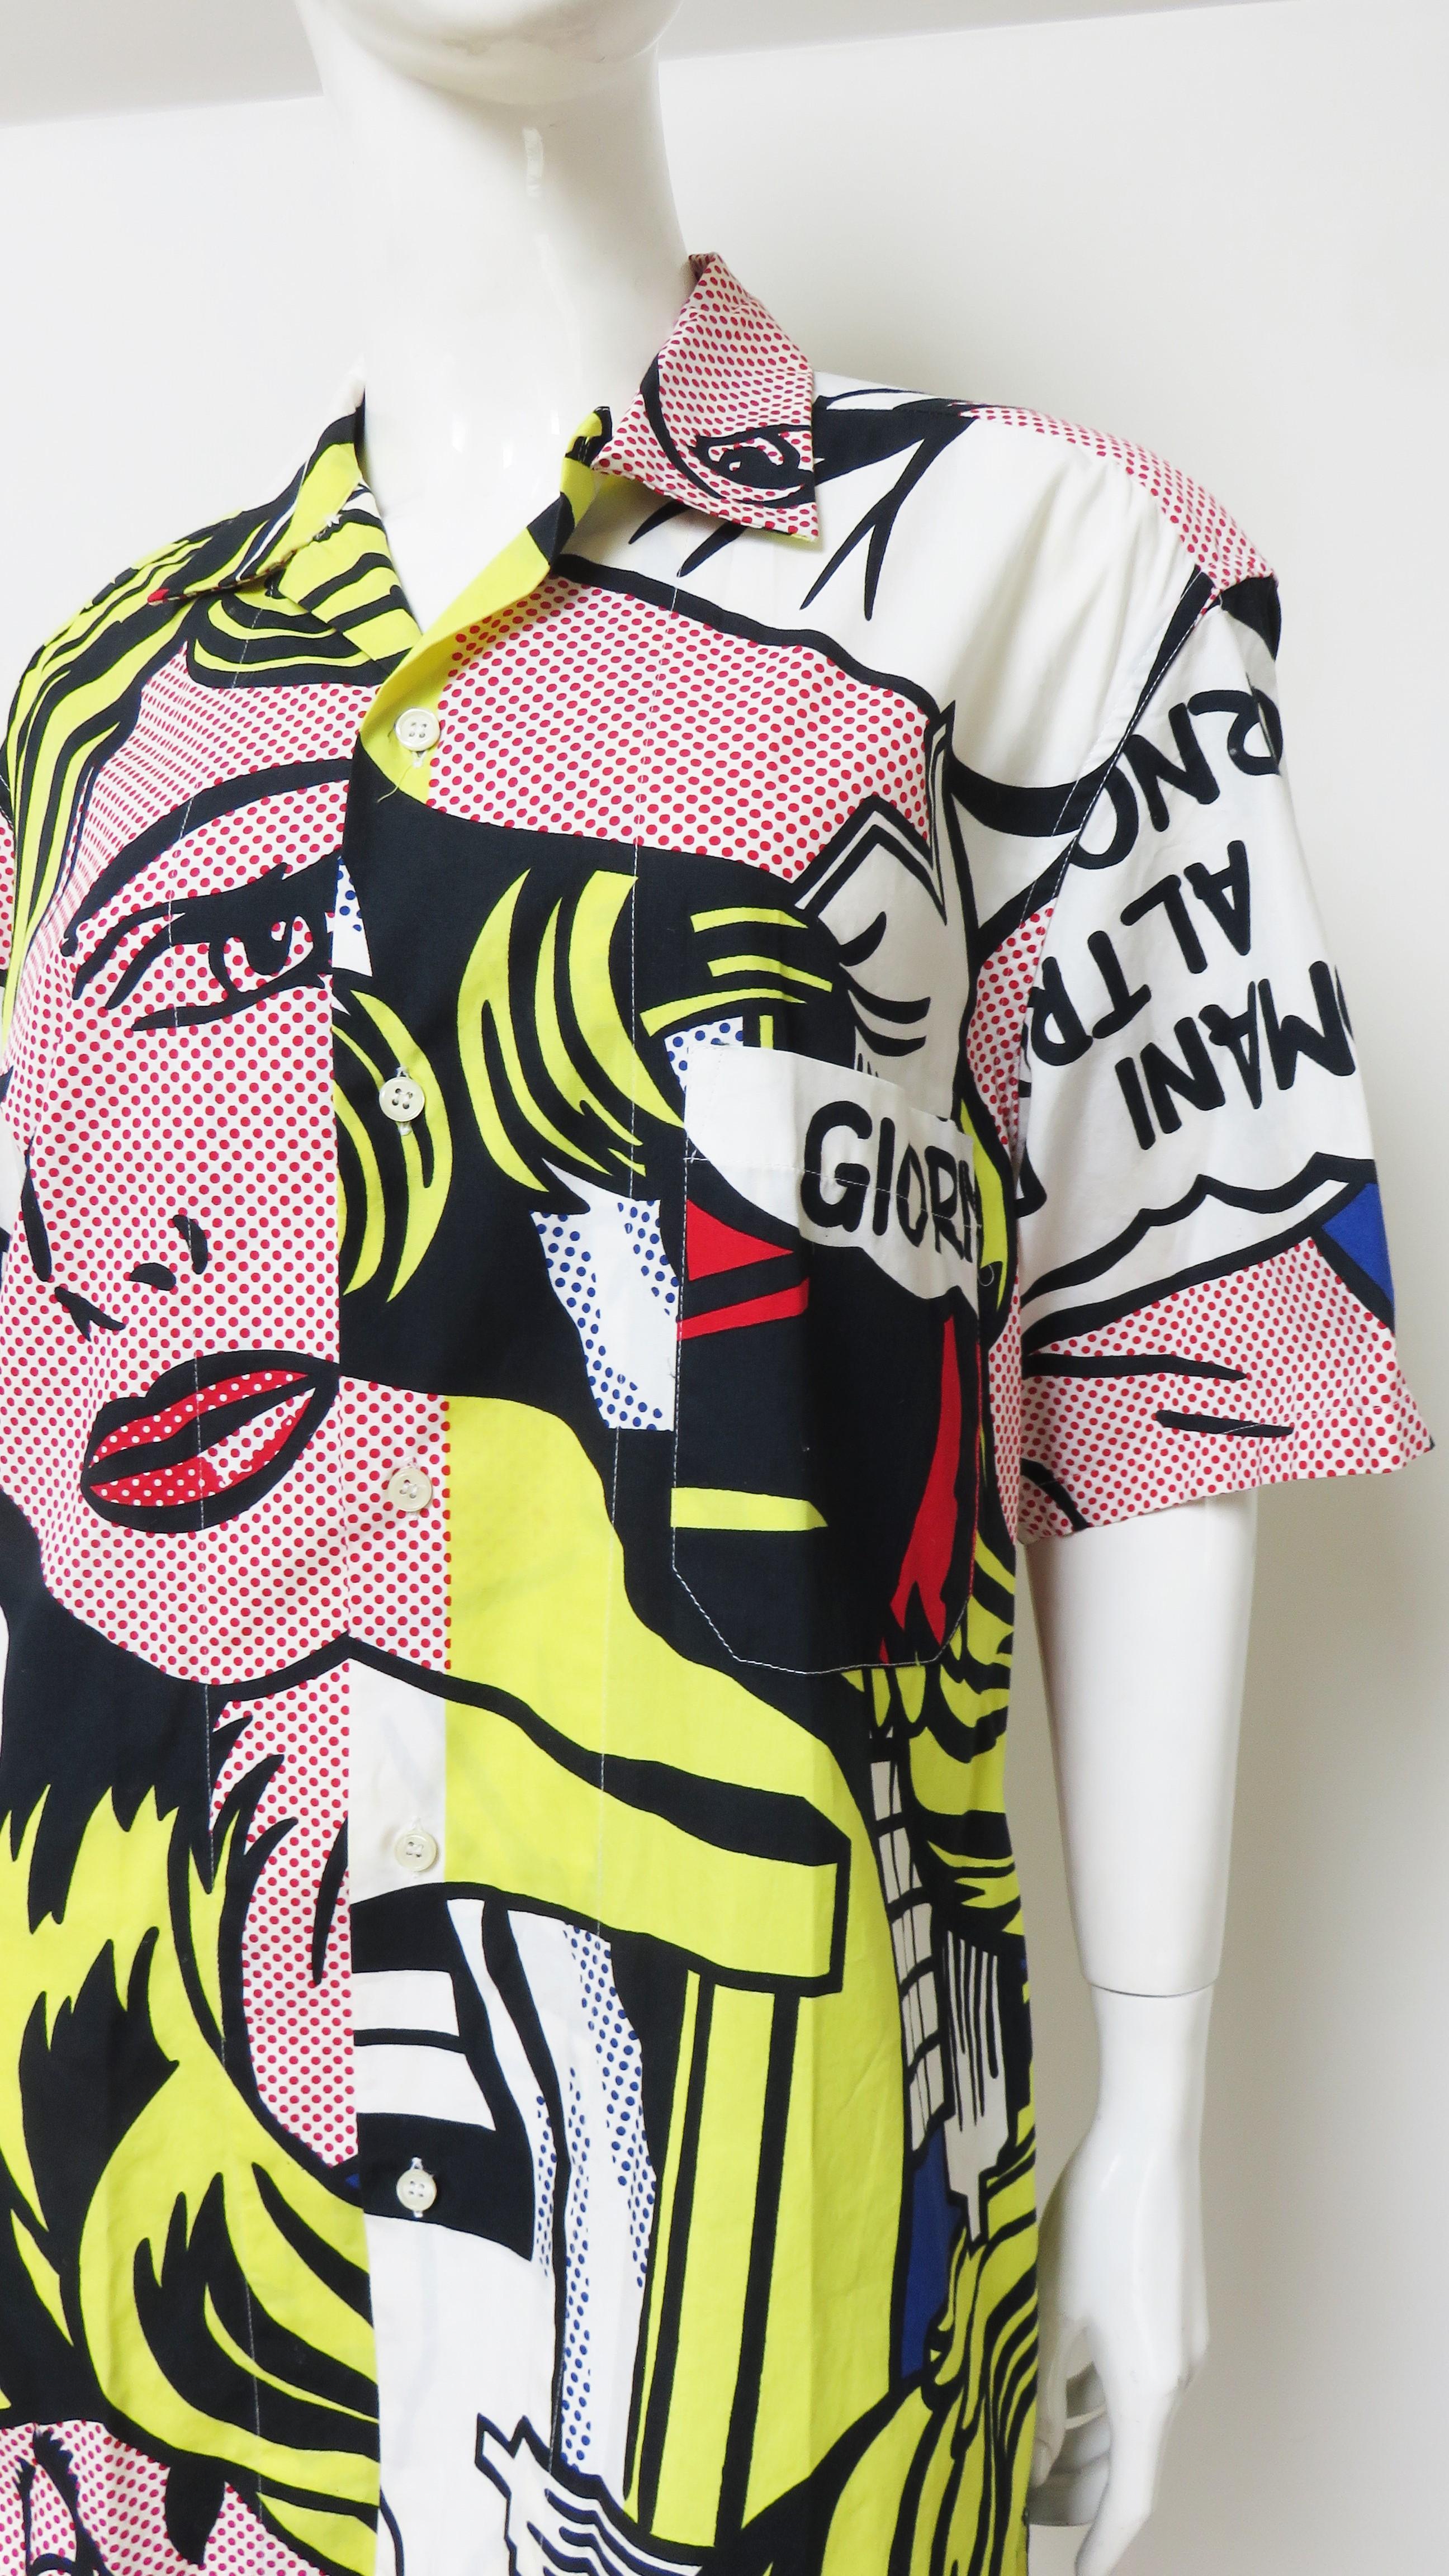 Moschino 1990s Lichtenstein Comic Print Shirt  In Good Condition For Sale In Water Mill, NY